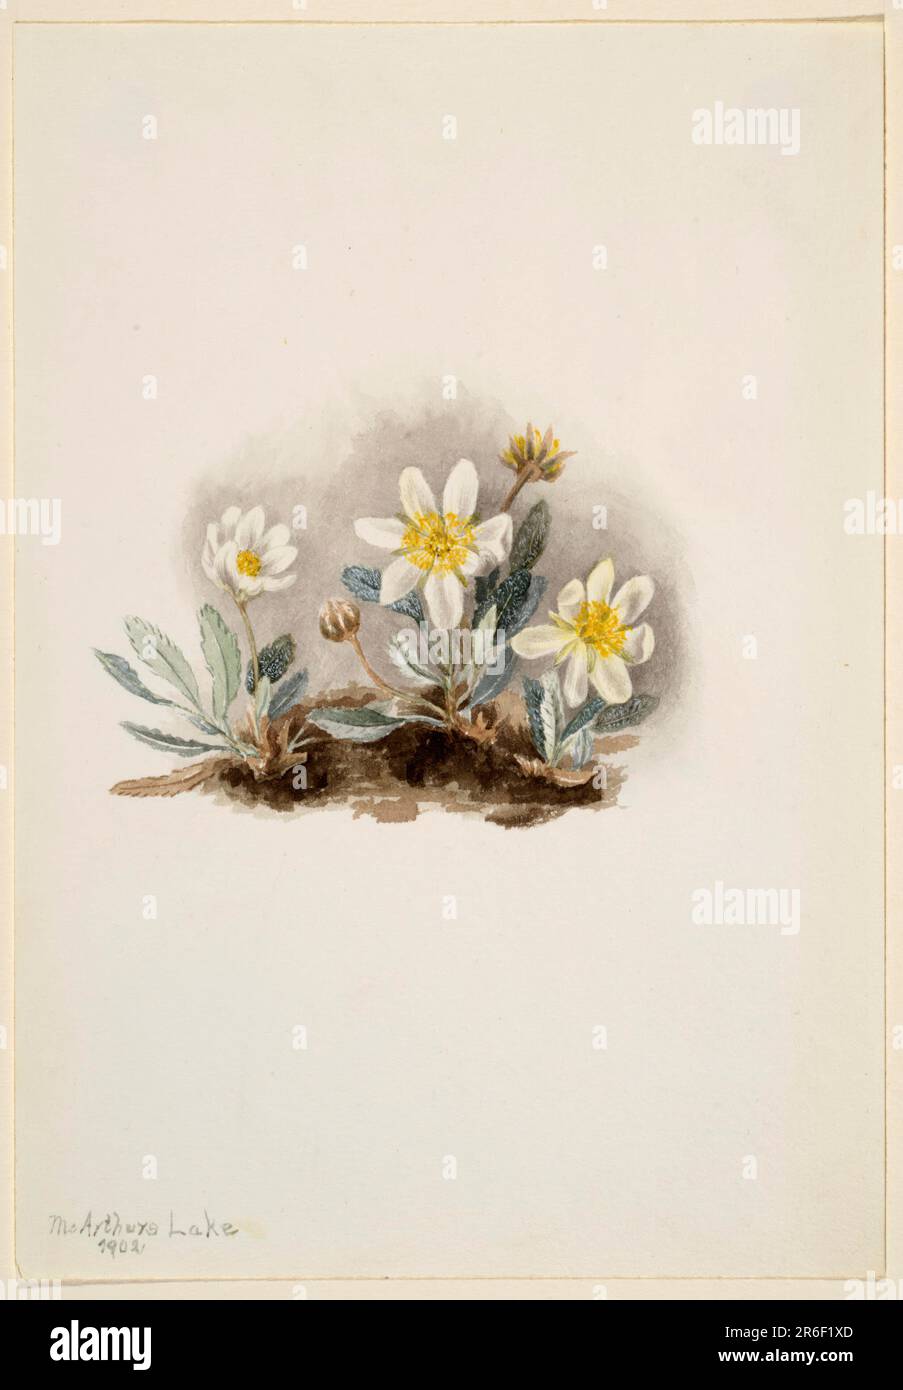 White Dryad (Dryas octopetala). Date: 1902. Watercolor on paper. Museum: Smithsonian American Art Museum. Stock Photo